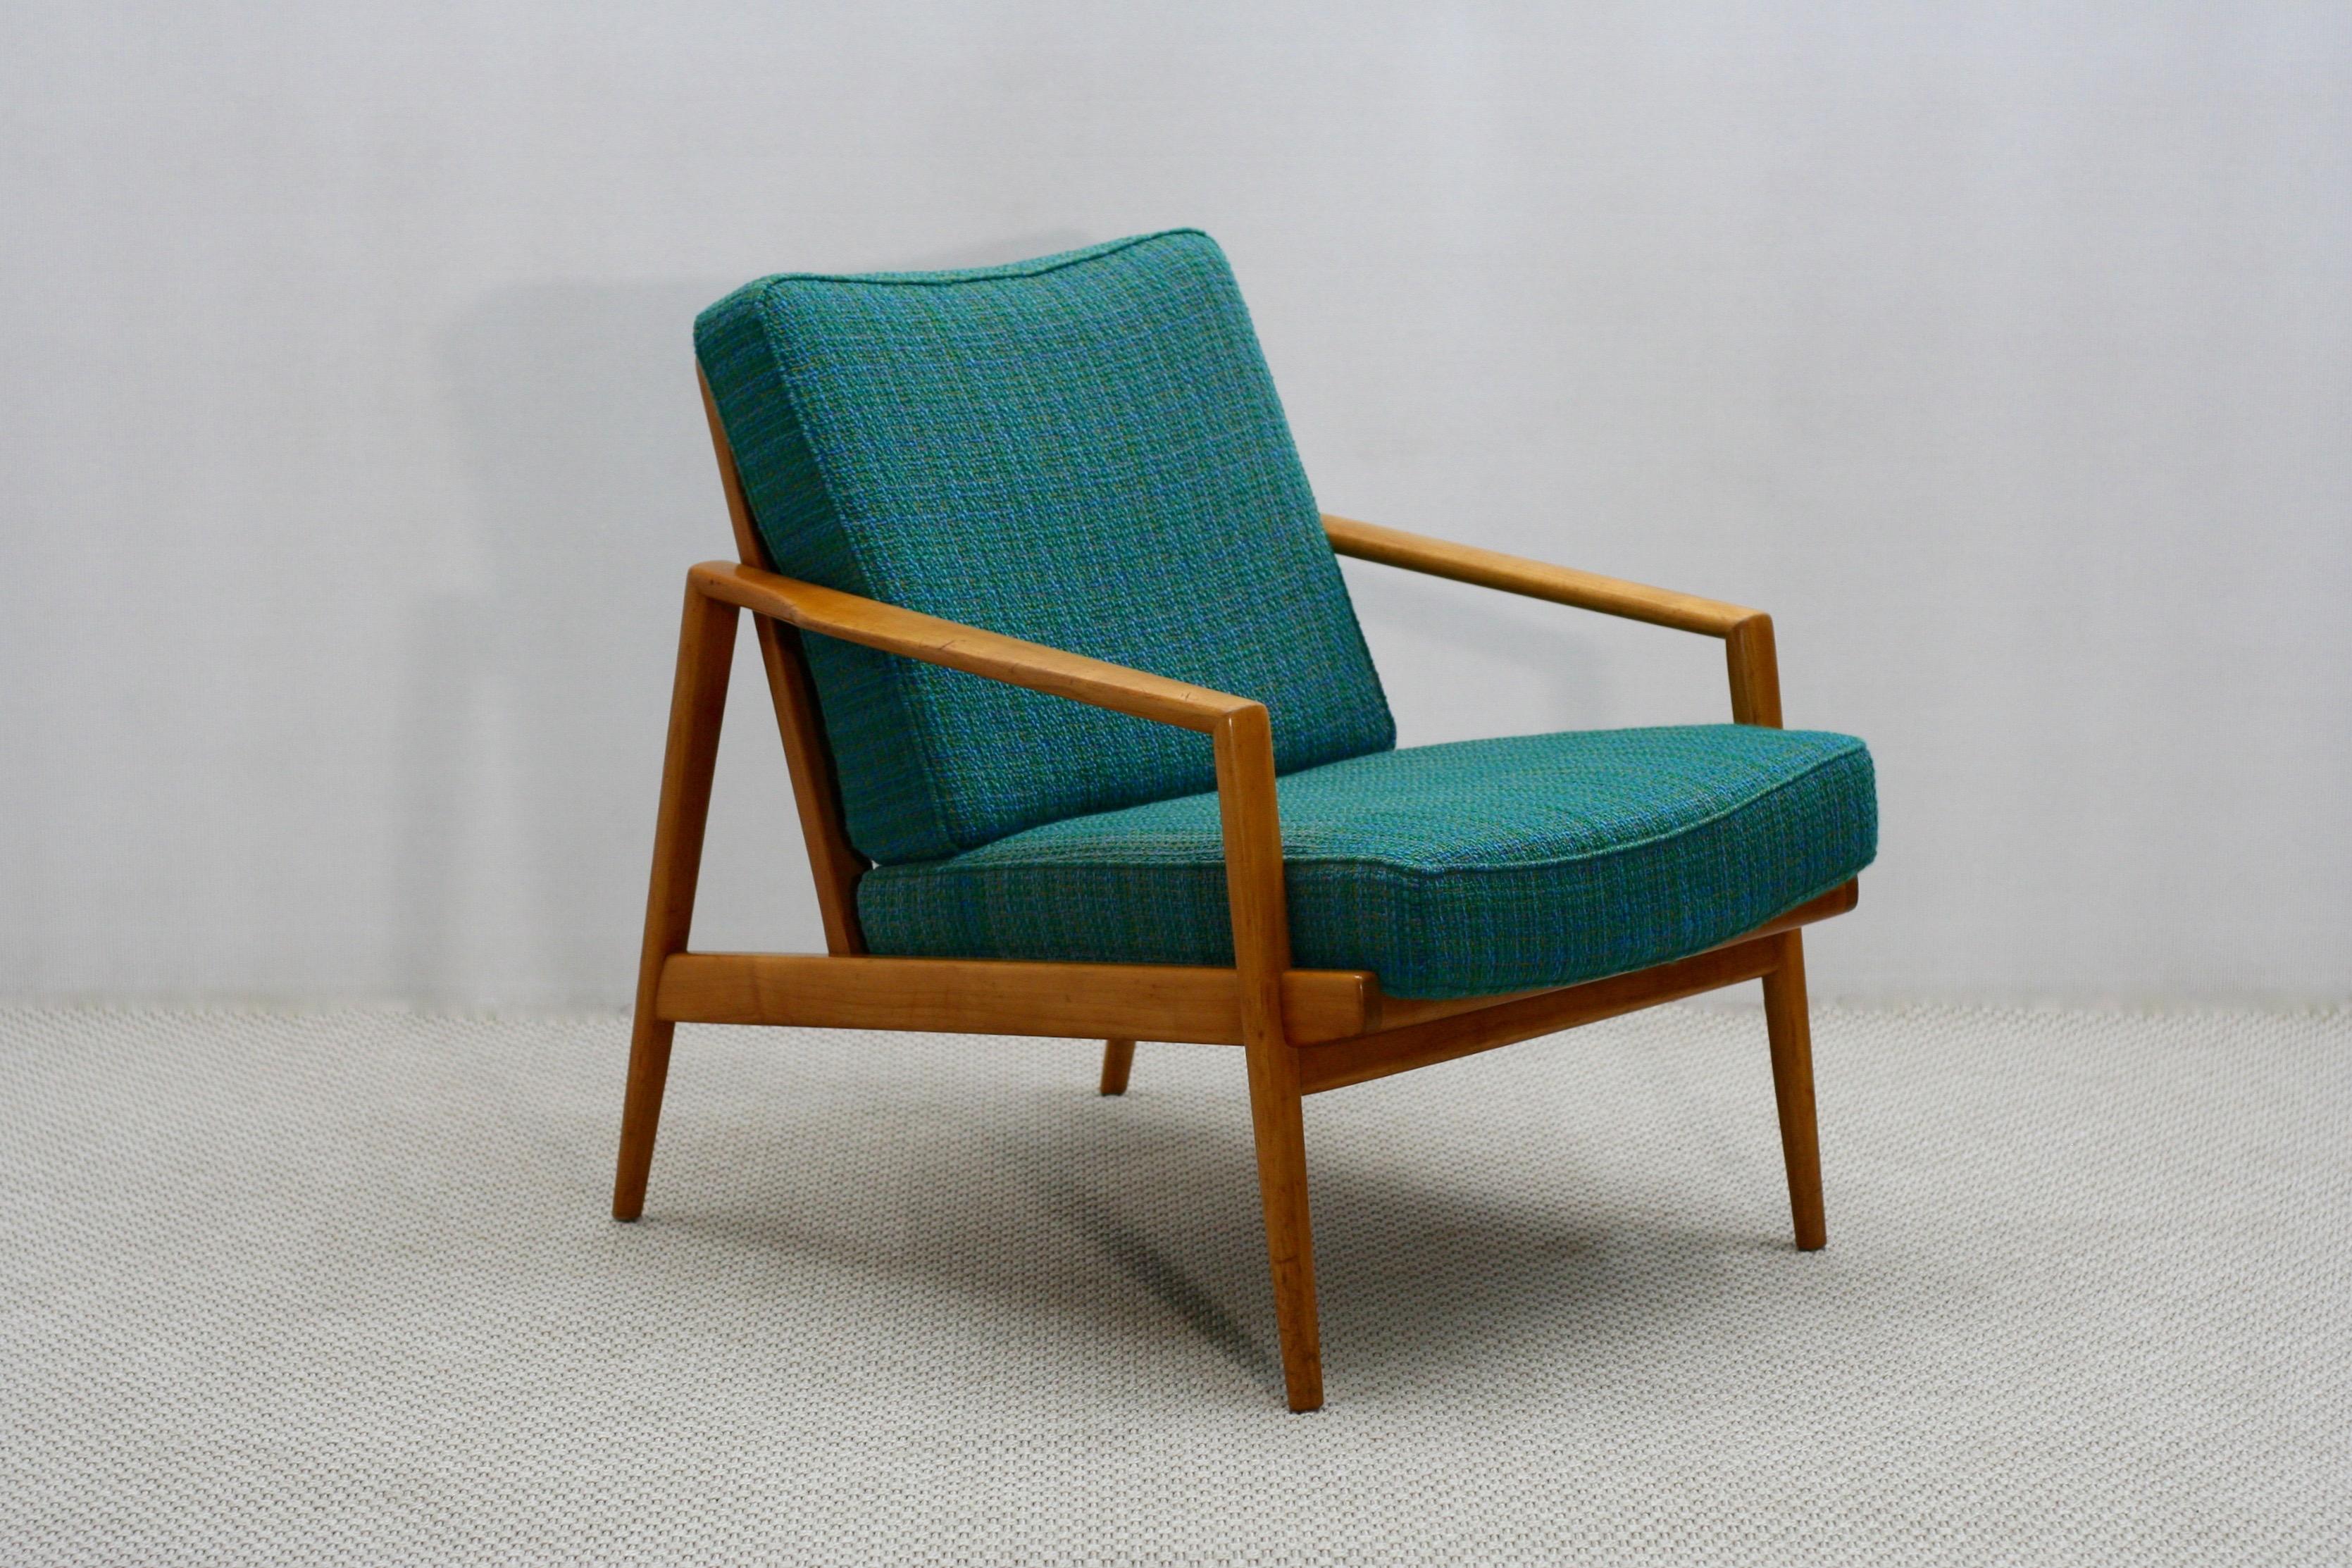 Set of Two Midcentury German Beech Wood Lounge Chairs from Knoll Antimott For Sale 3